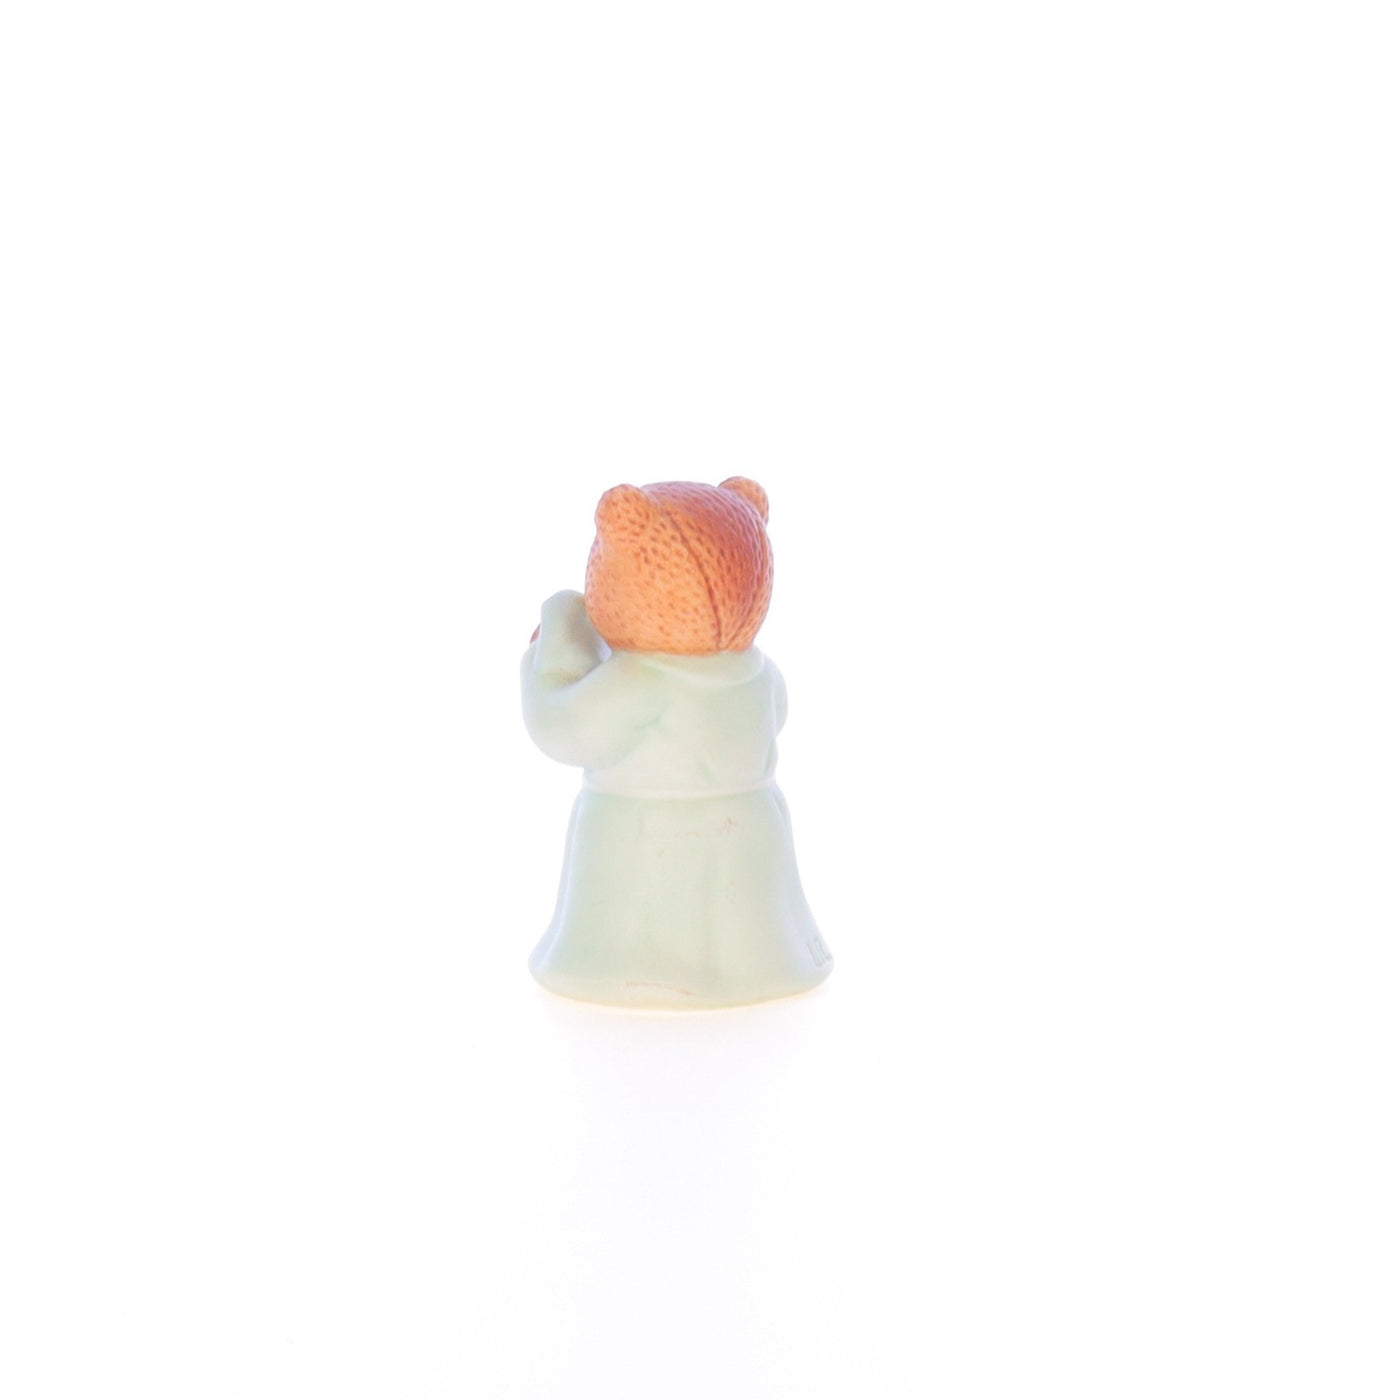 Lucy_And_Me_by_Lucy_Atwell_Porcelain_Figurine_Bear_with_Bath_Robe_Lucy_Unknown_010_04